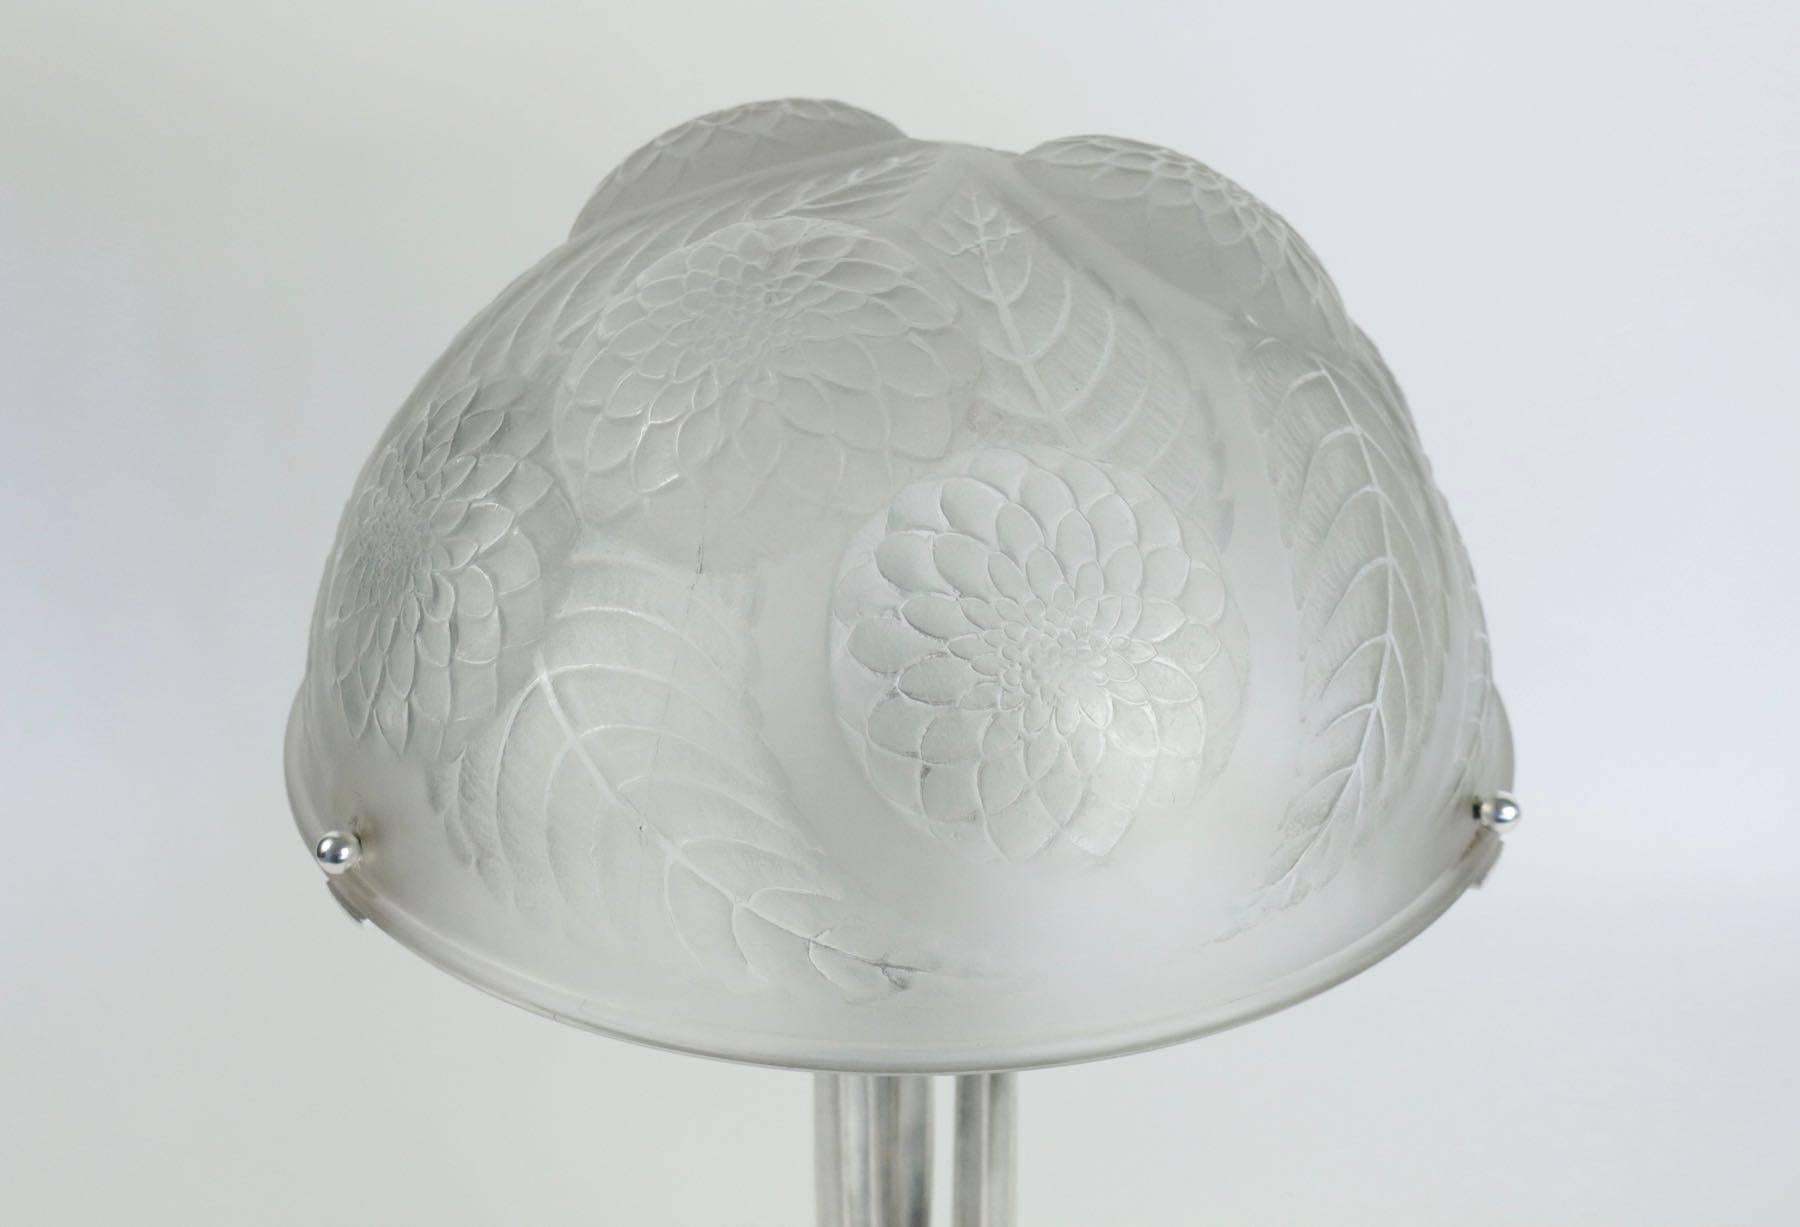 1921, René Lalique Art Deco table lamp with signed, molded glass shade, on an architecturally inspired polished silver plated finish over bronze. 
Measures: 30 cm wide, 
total high 48 cm tall.
 Bronze base 32 cm, diameter 32 cm.
René Lalique